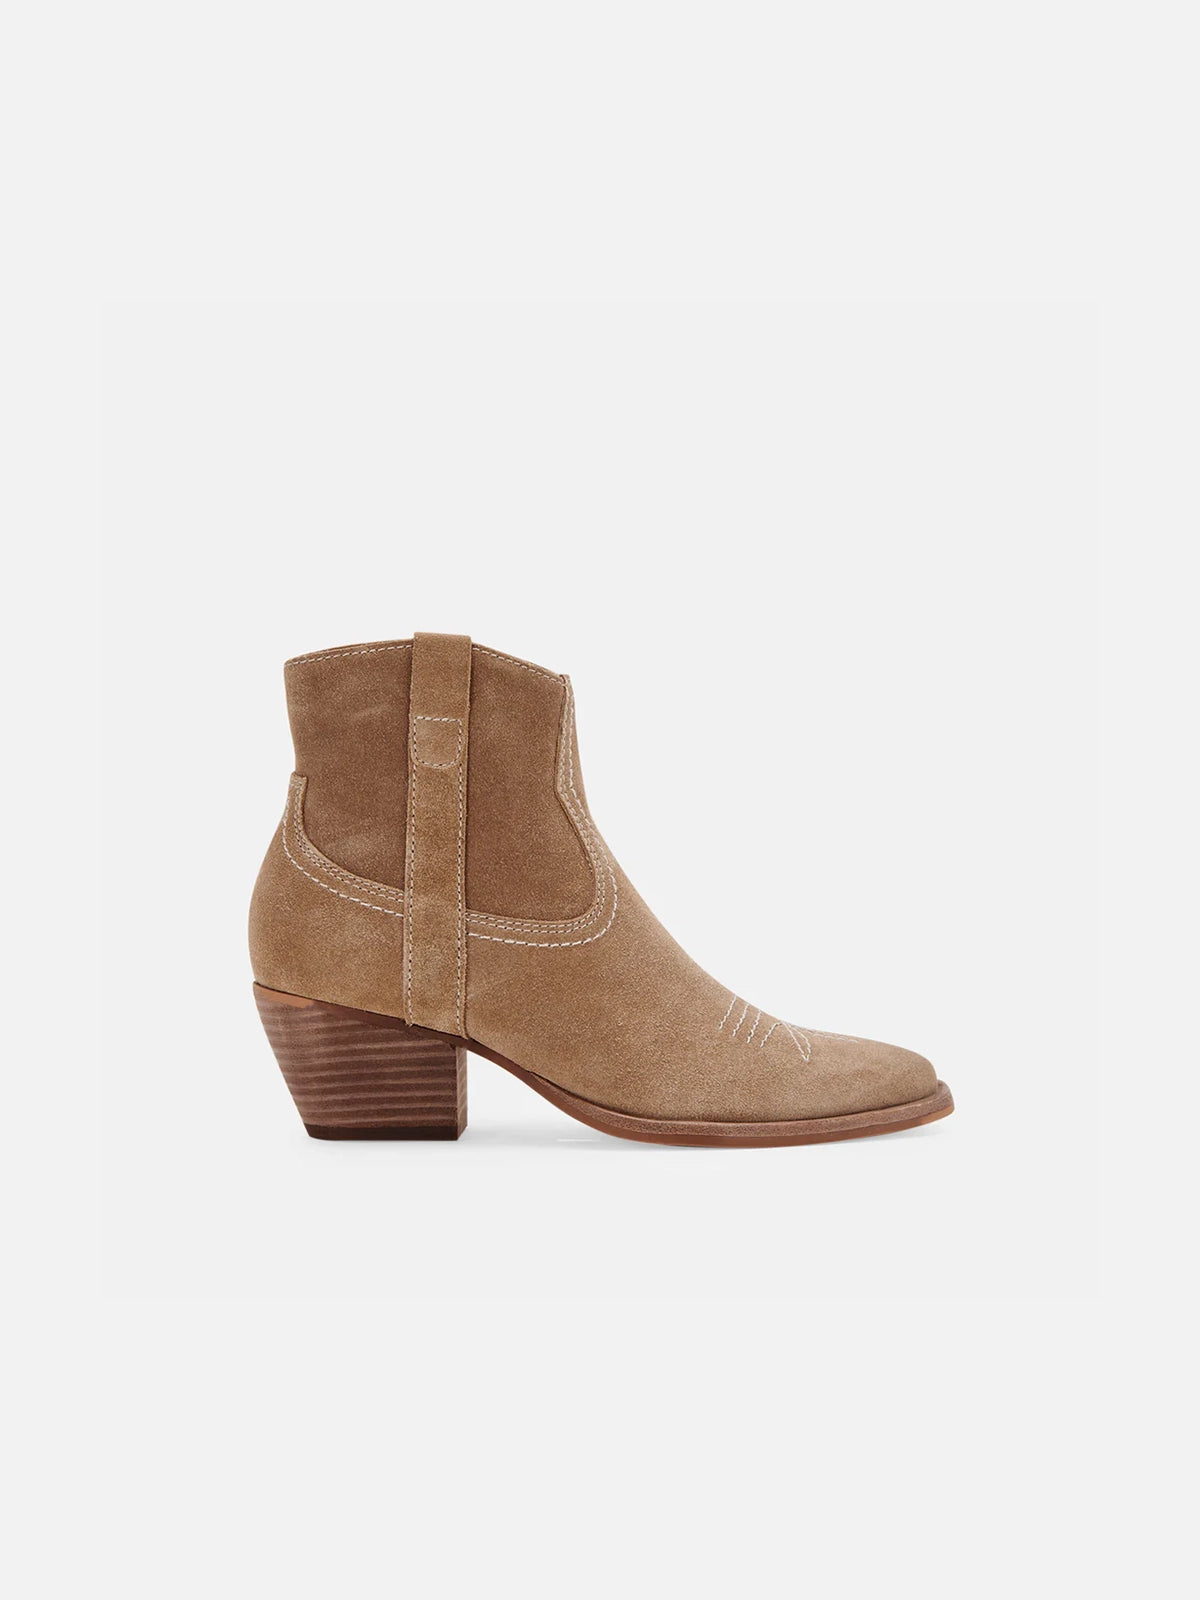 dolce vita silma bootie in truffle suede